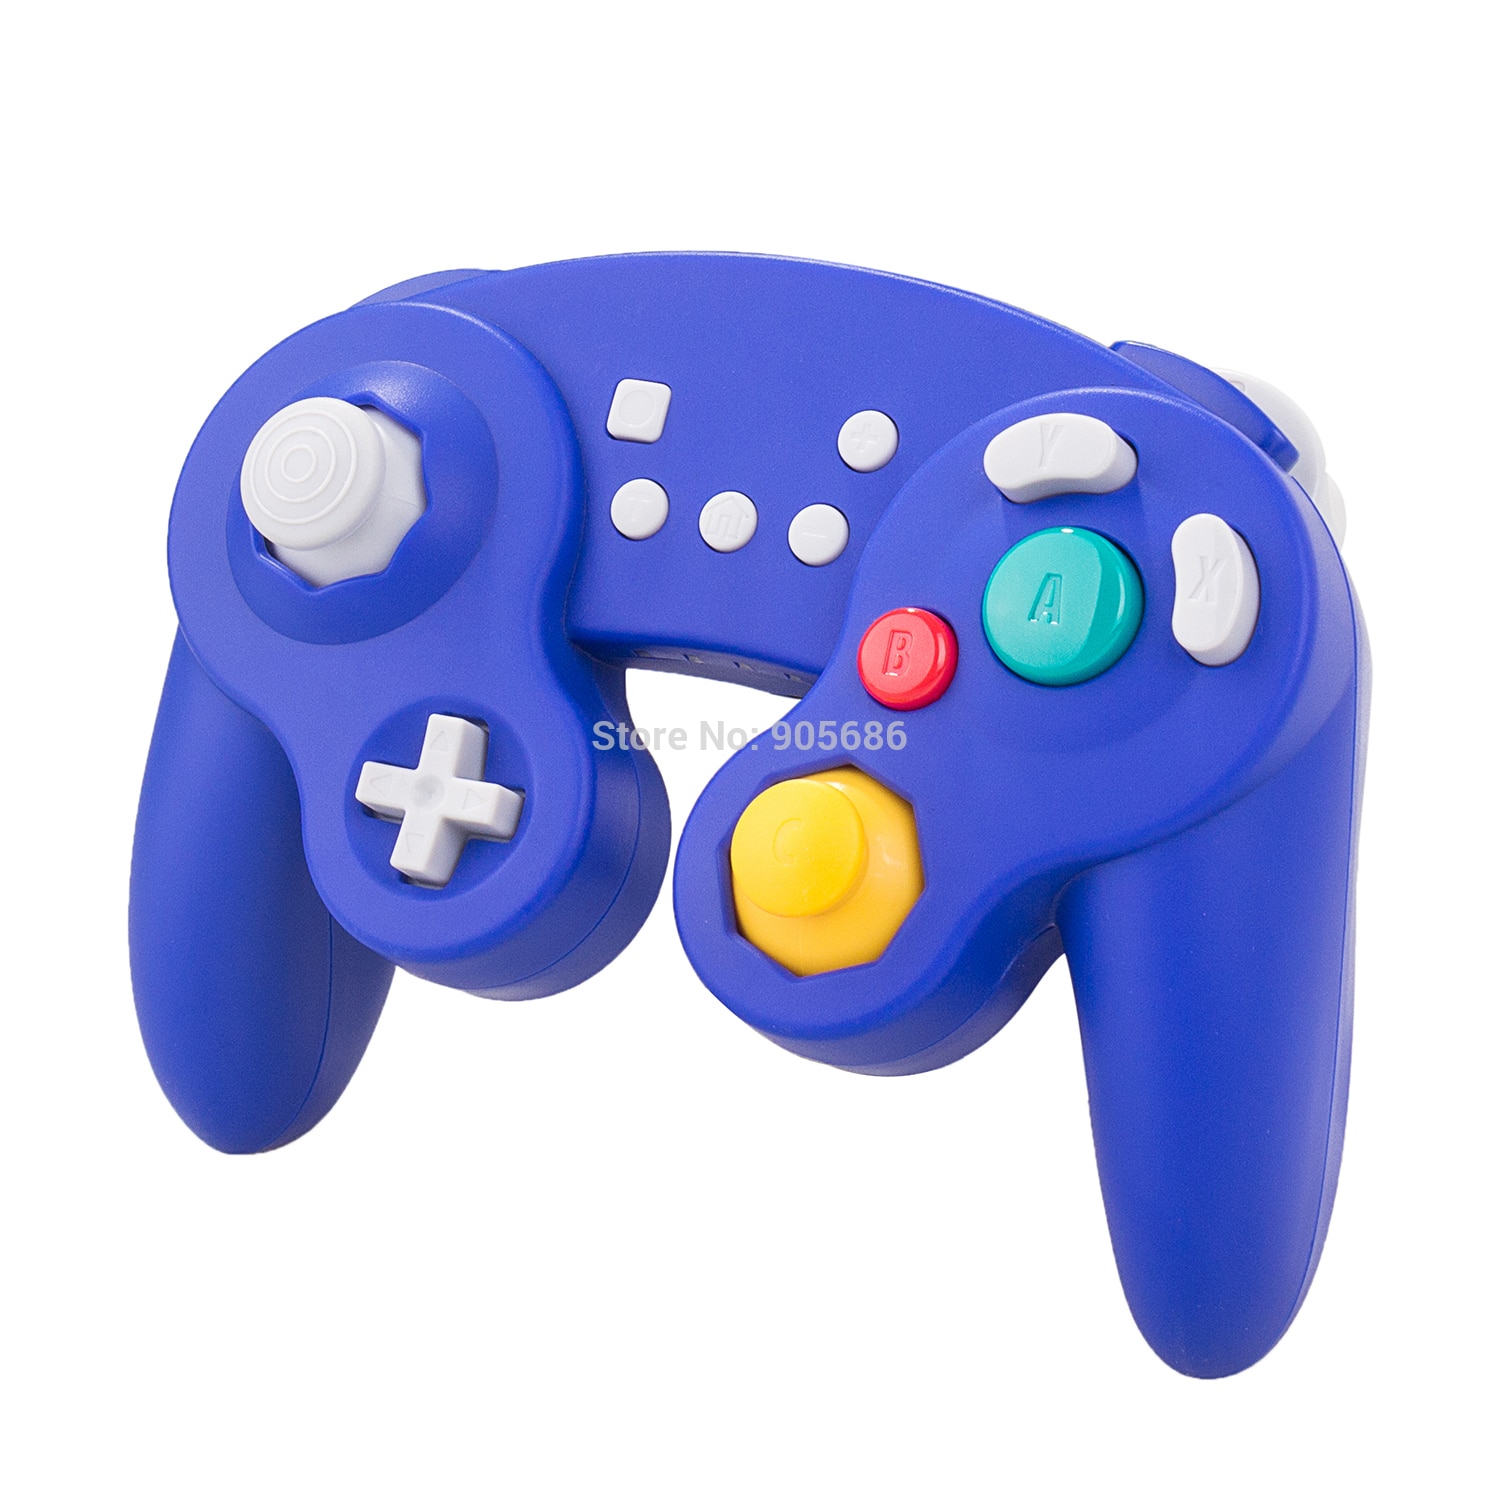 EXLENE Bluetooth Wireless Gamecube Controller for Nintendo Switch, Rechargeable, Motion controls/Rumble/Turbo